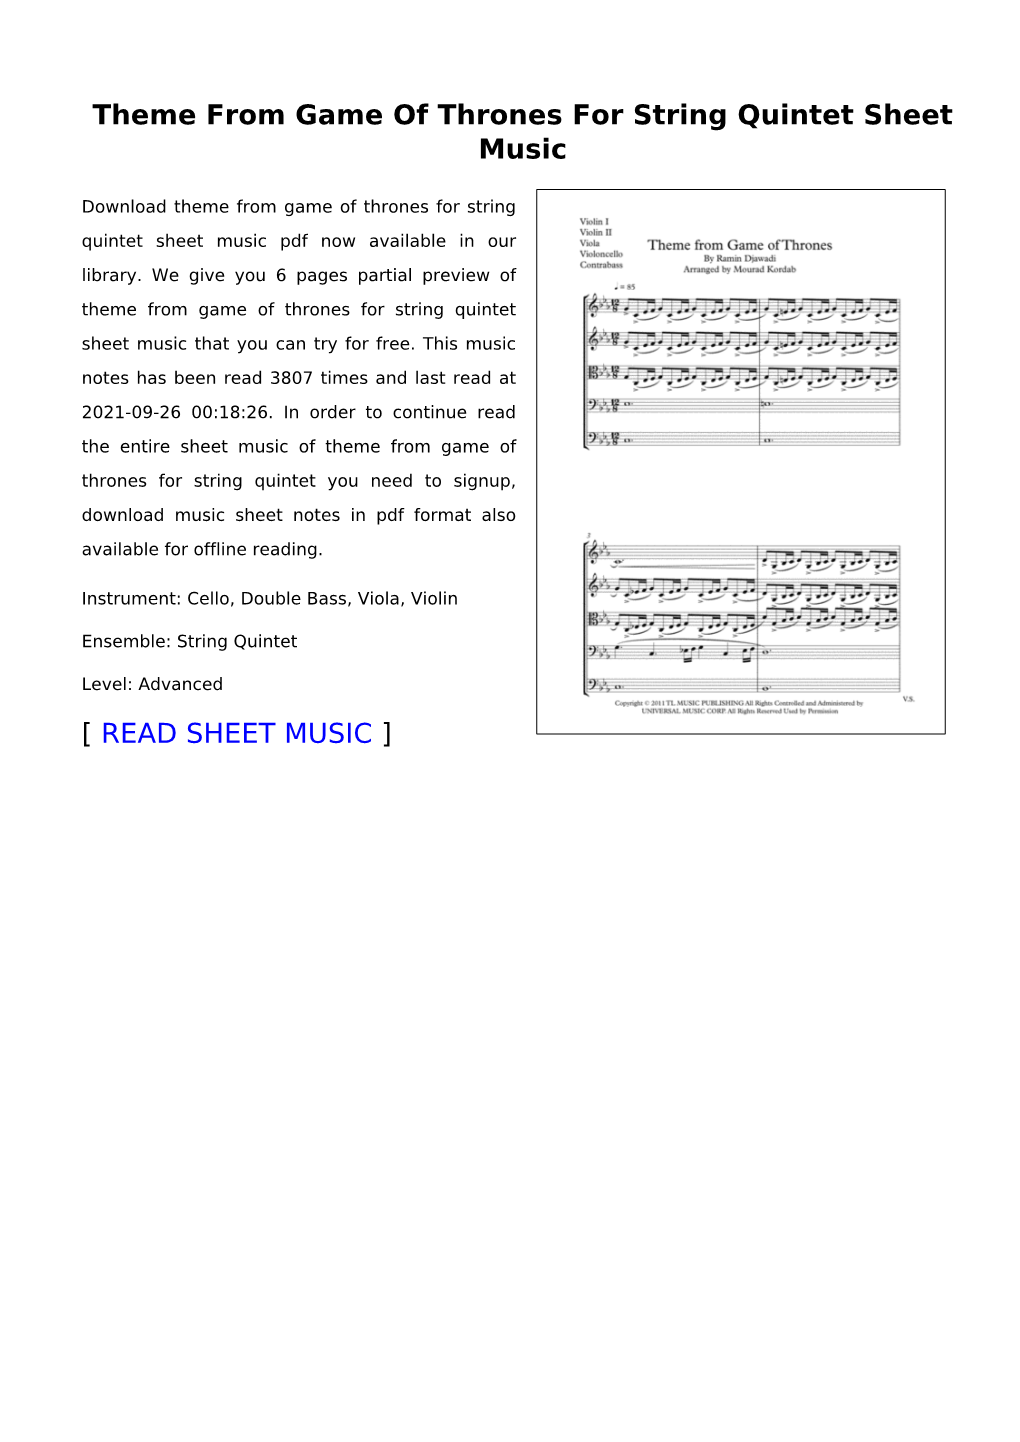 Theme from Game of Thrones for String Quintet Sheet Music